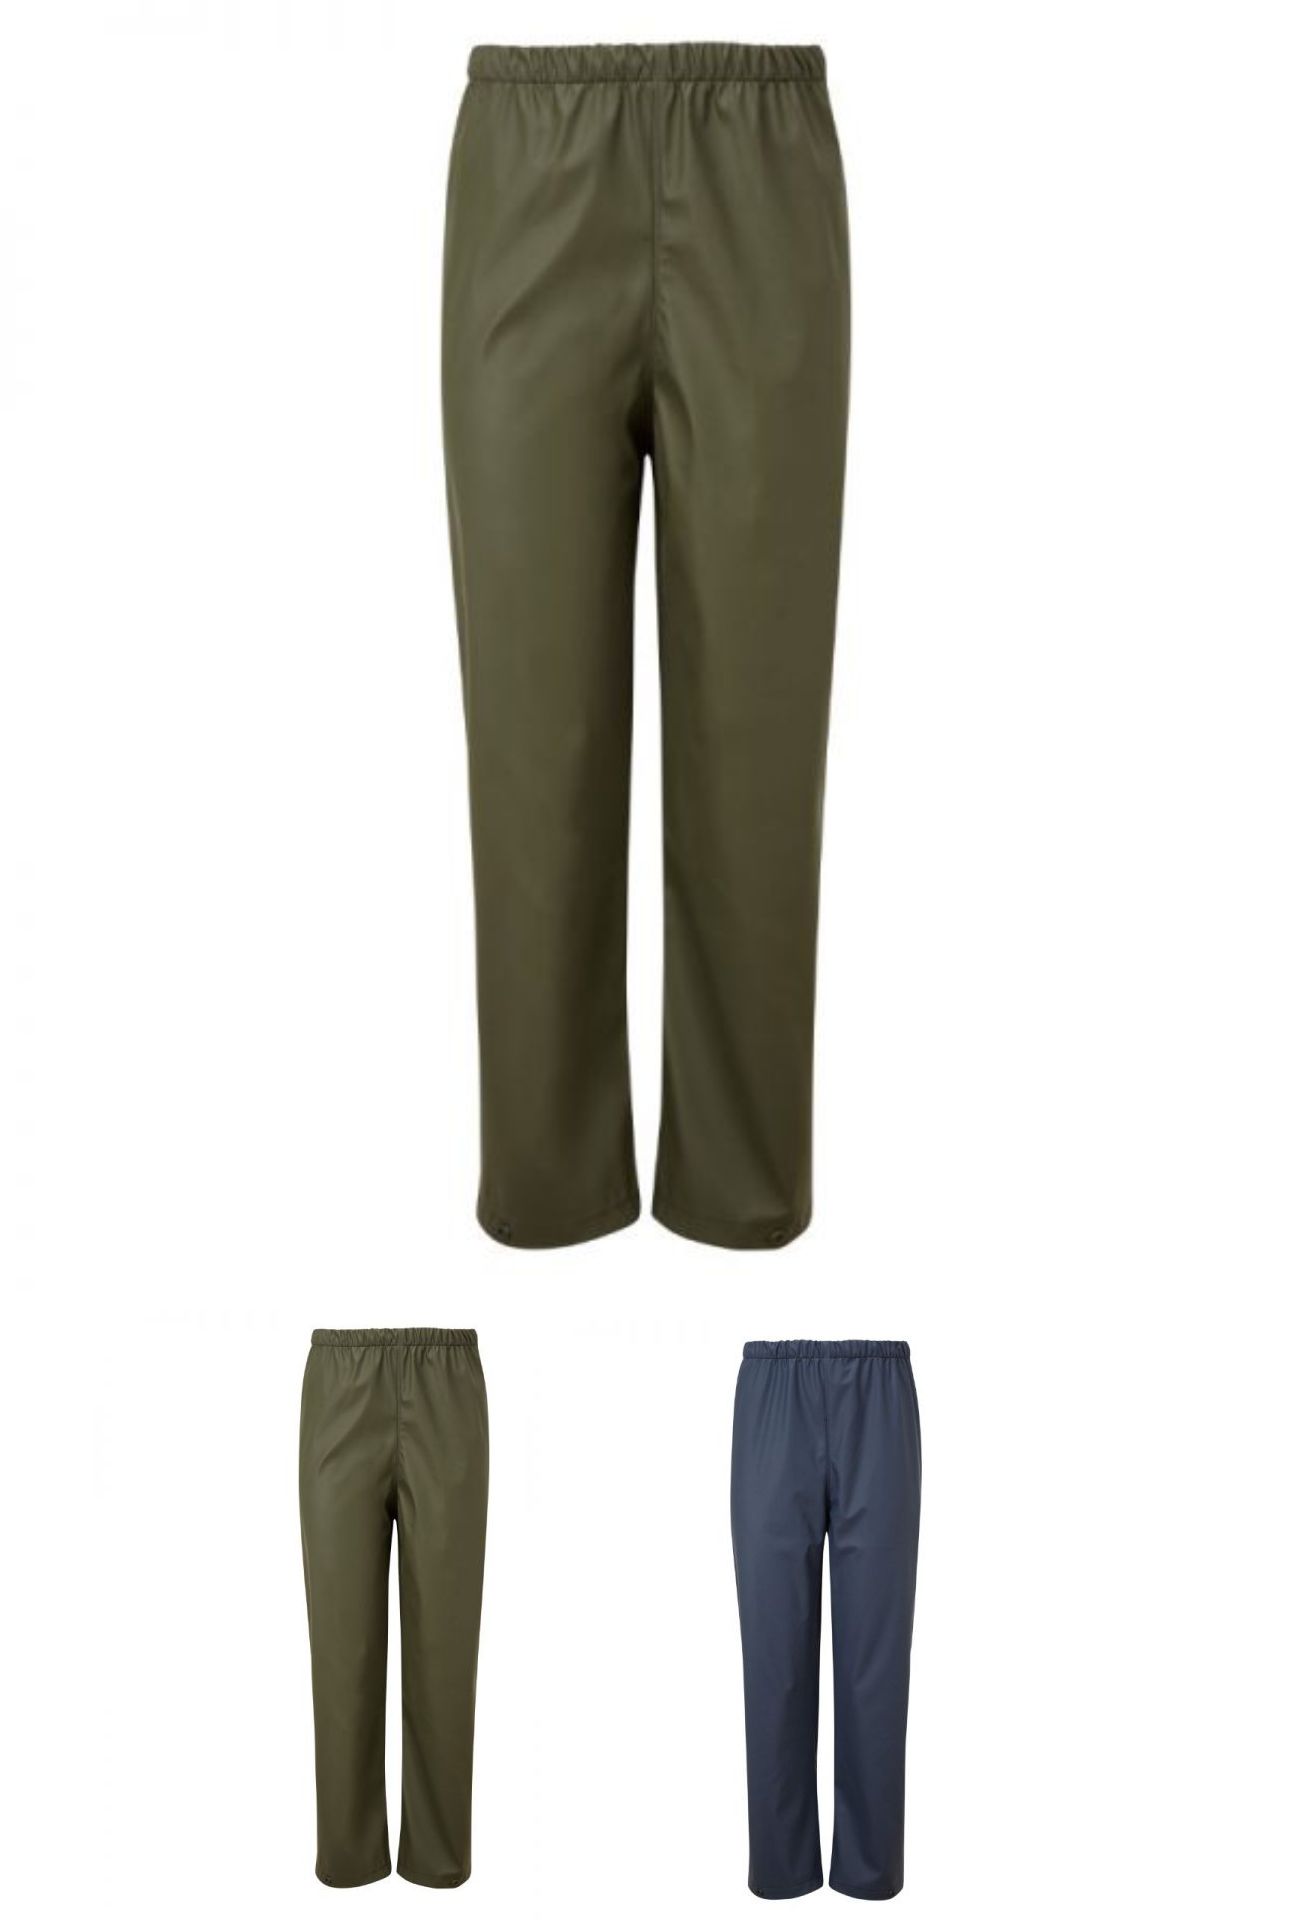 983 Fort Spashflex Trousers - Click Image to Close